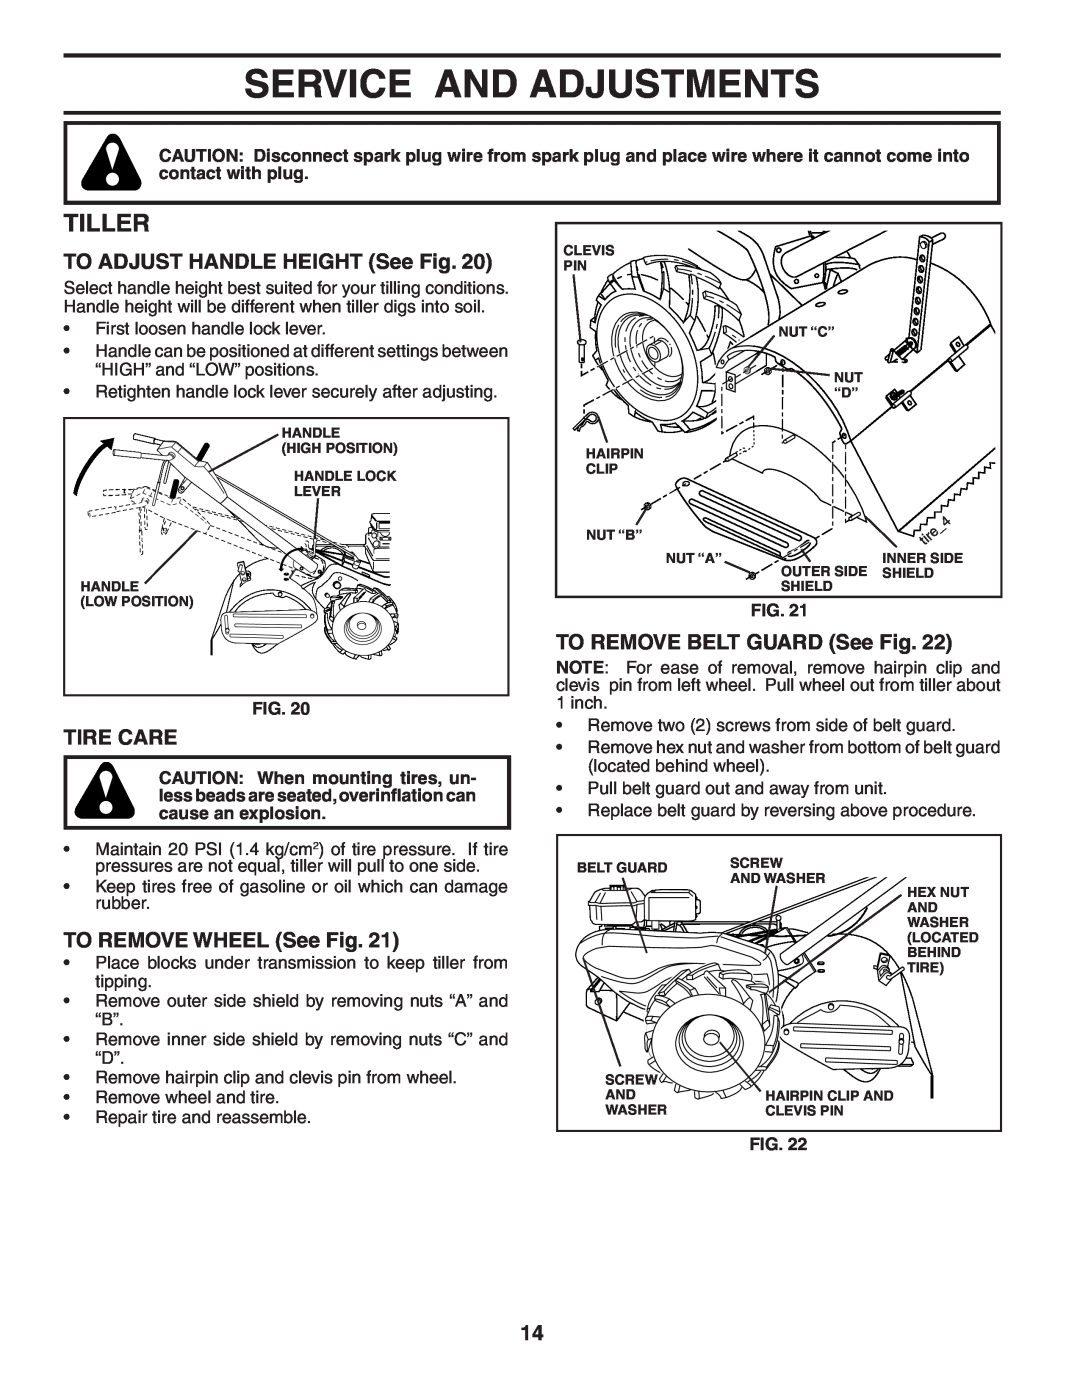 Poulan 401434 manual Service And Adjustments, Tiller, TO ADJUST HANDLE HEIGHT See Fig, Tire Care, TO REMOVE WHEEL See Fig 